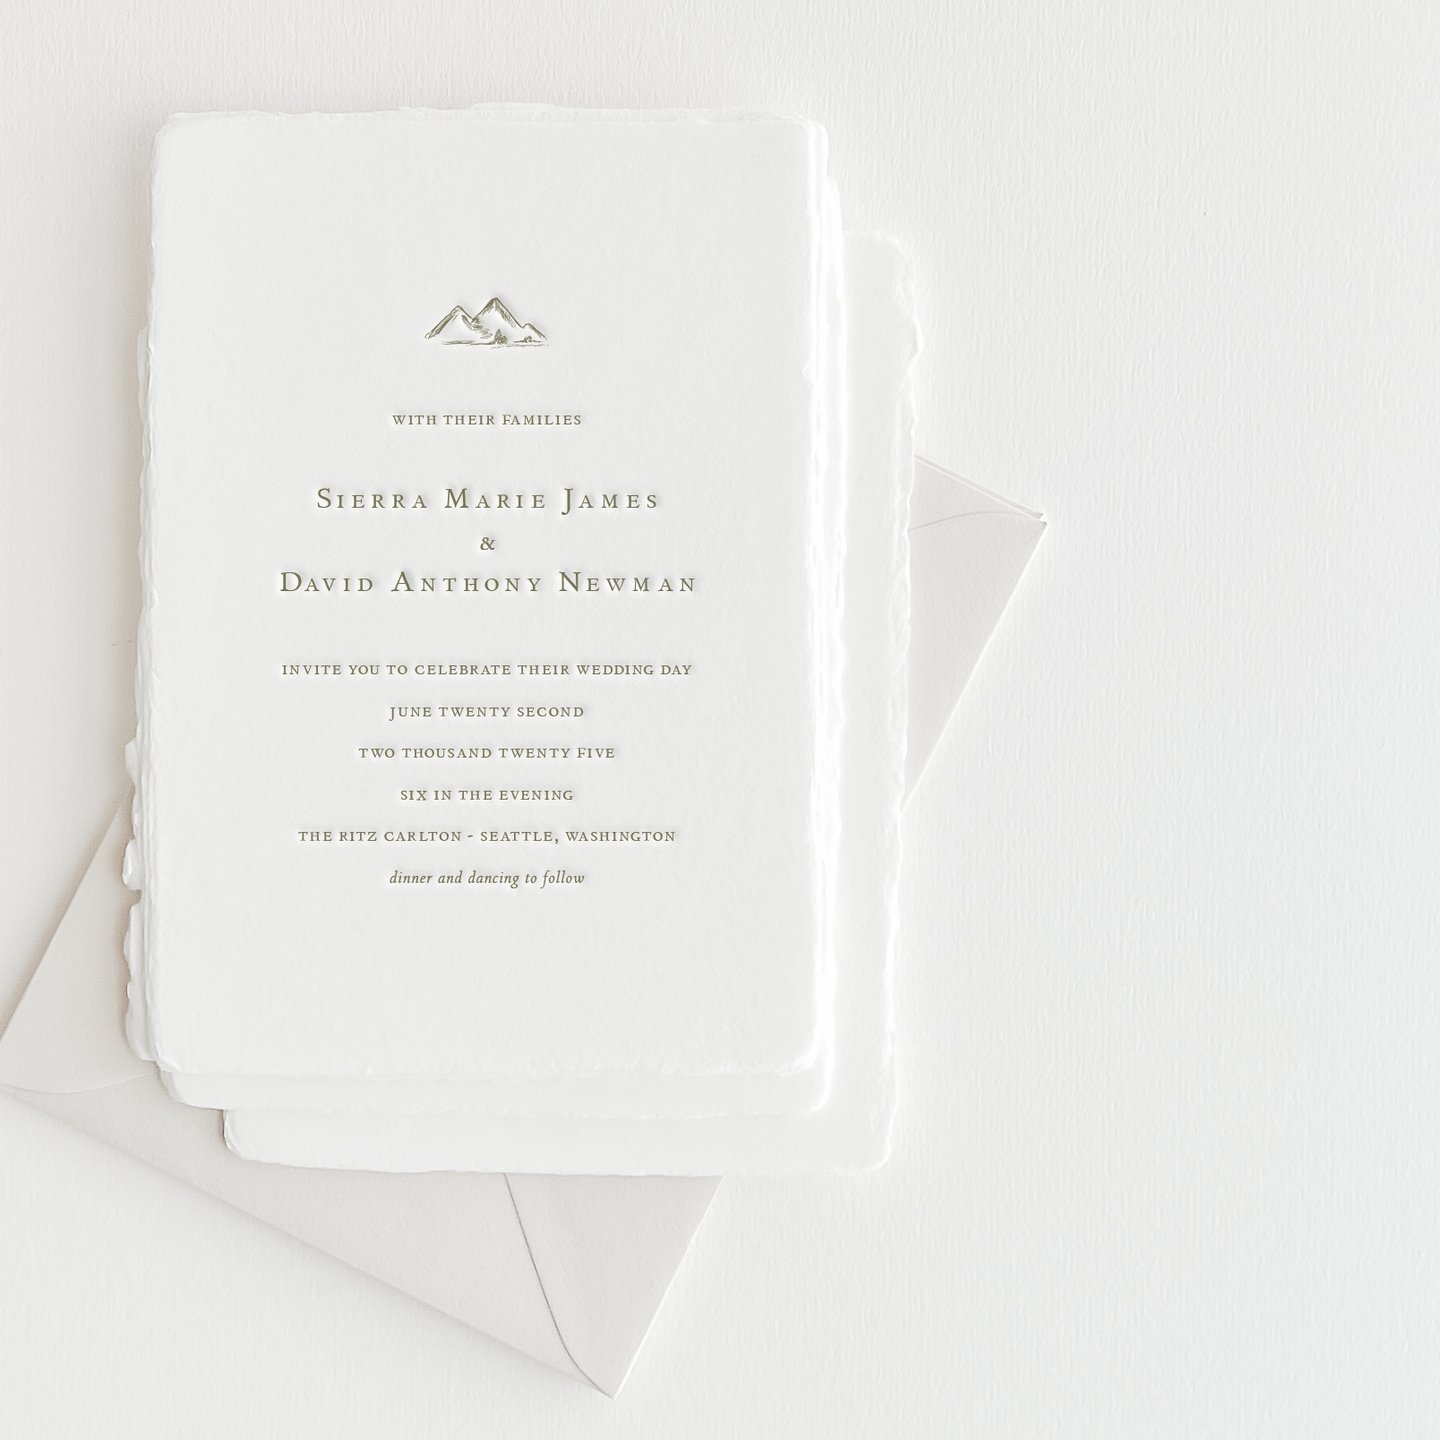 Our Mountains design on vintage white handmade paper ...